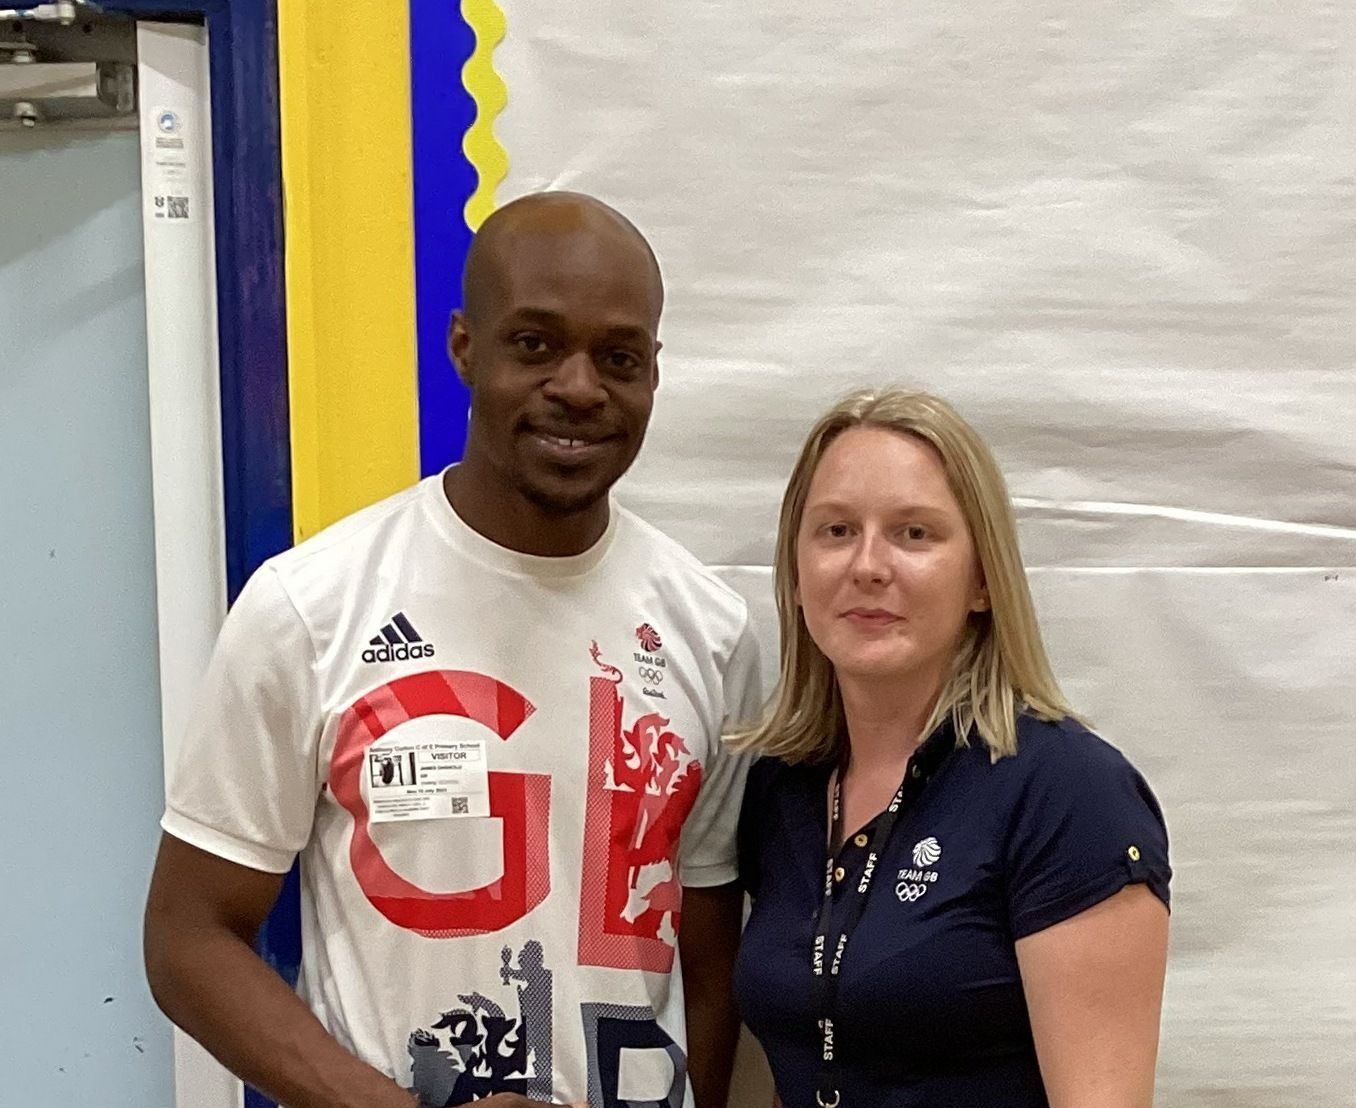 GB sprinter James Dasaolu visited Anthony Curton Primary School in Wisbech